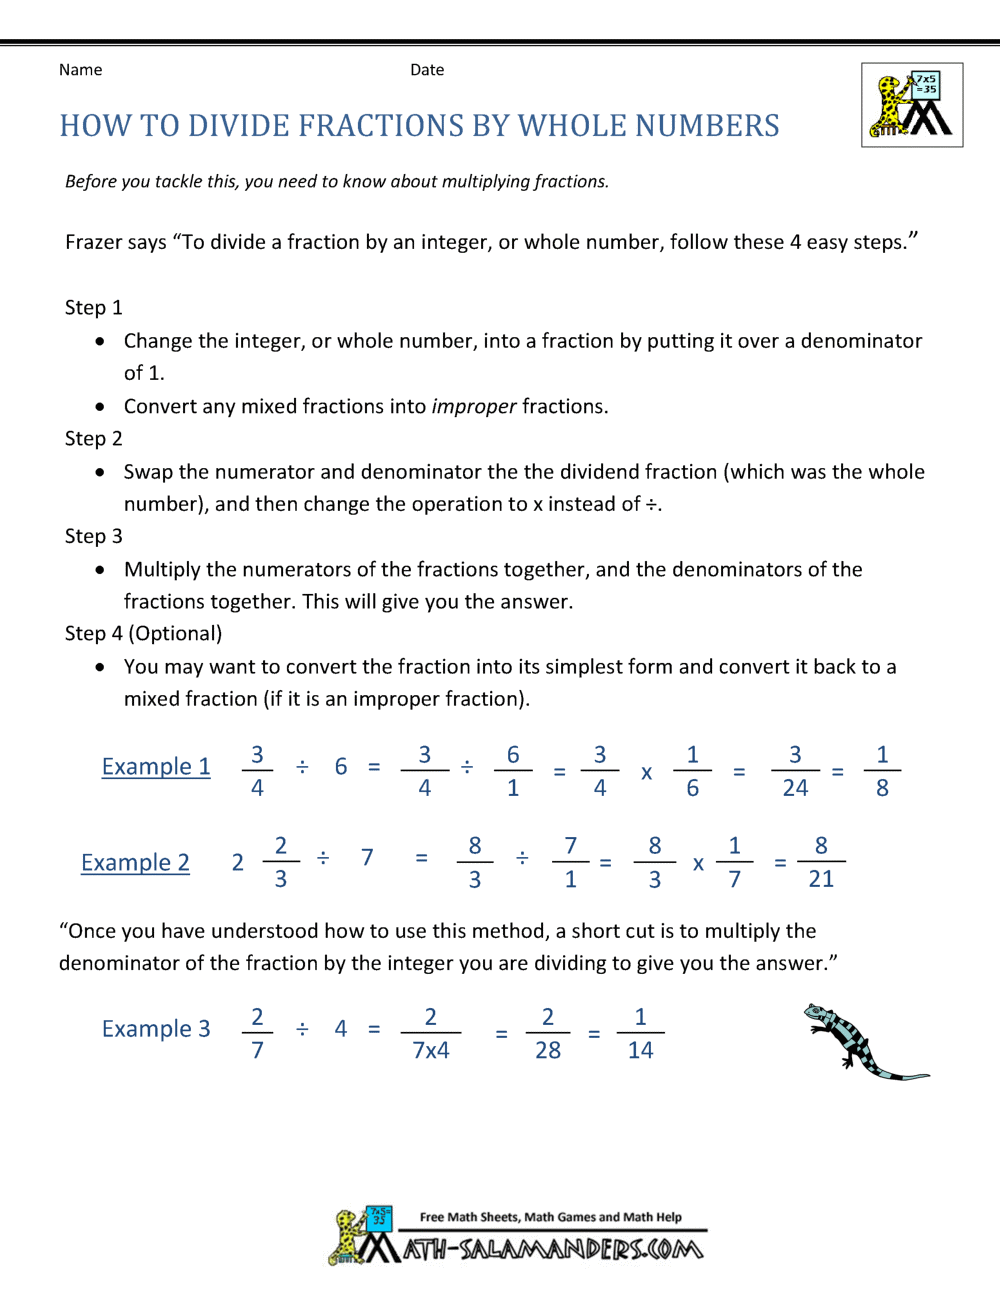 dividing-fractions-by-whole-numbers